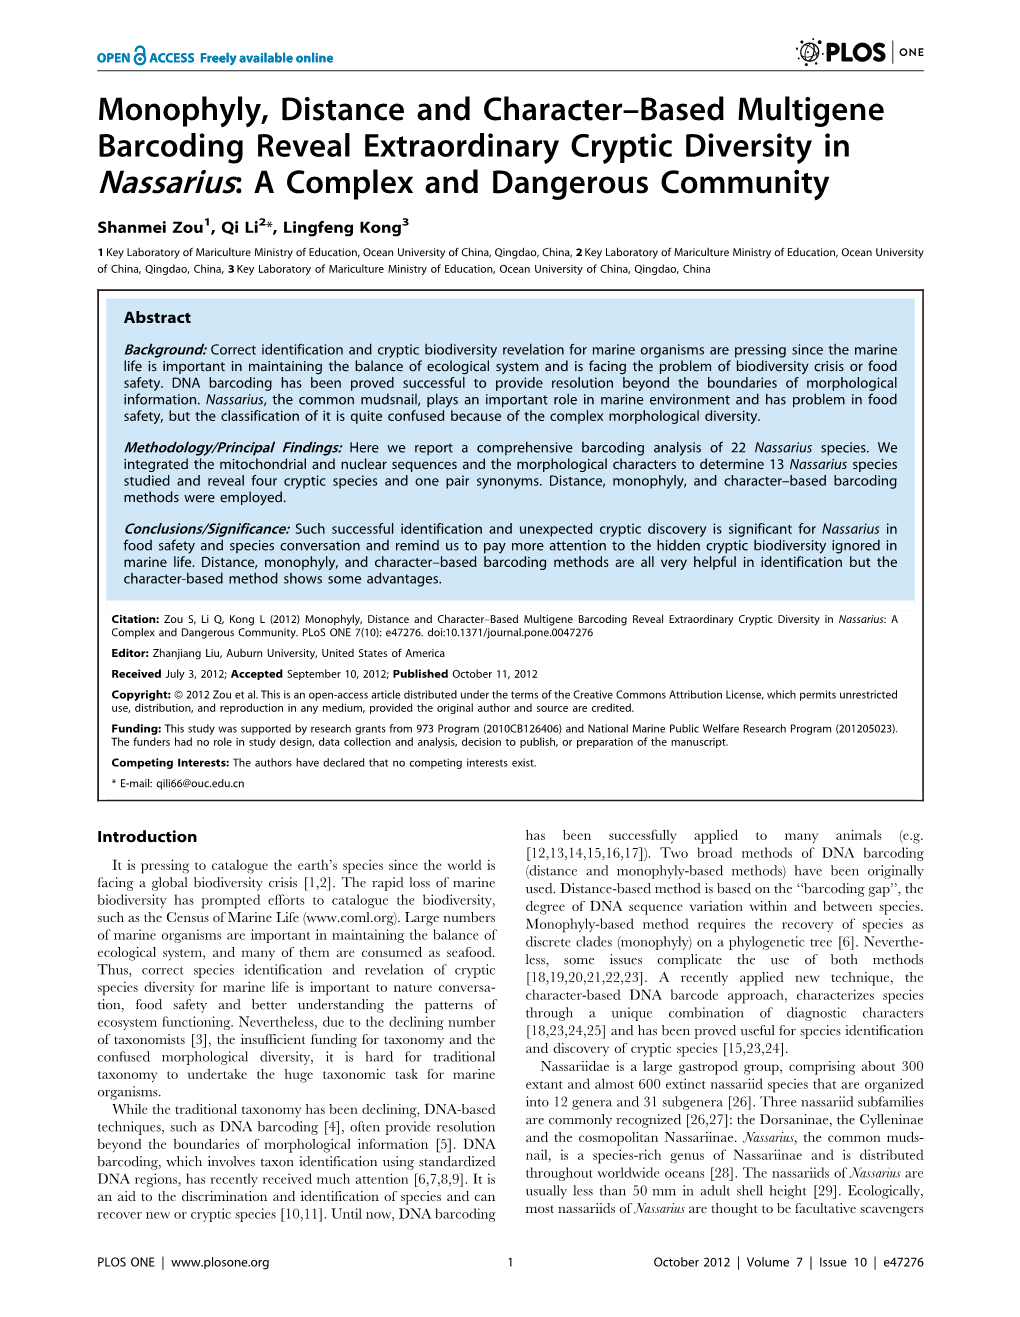 Monophyly, Distance and Character–Based Multigene Barcoding Reveal Extraordinary Cryptic Diversity in Nassarius: a Complex and Dangerous Community